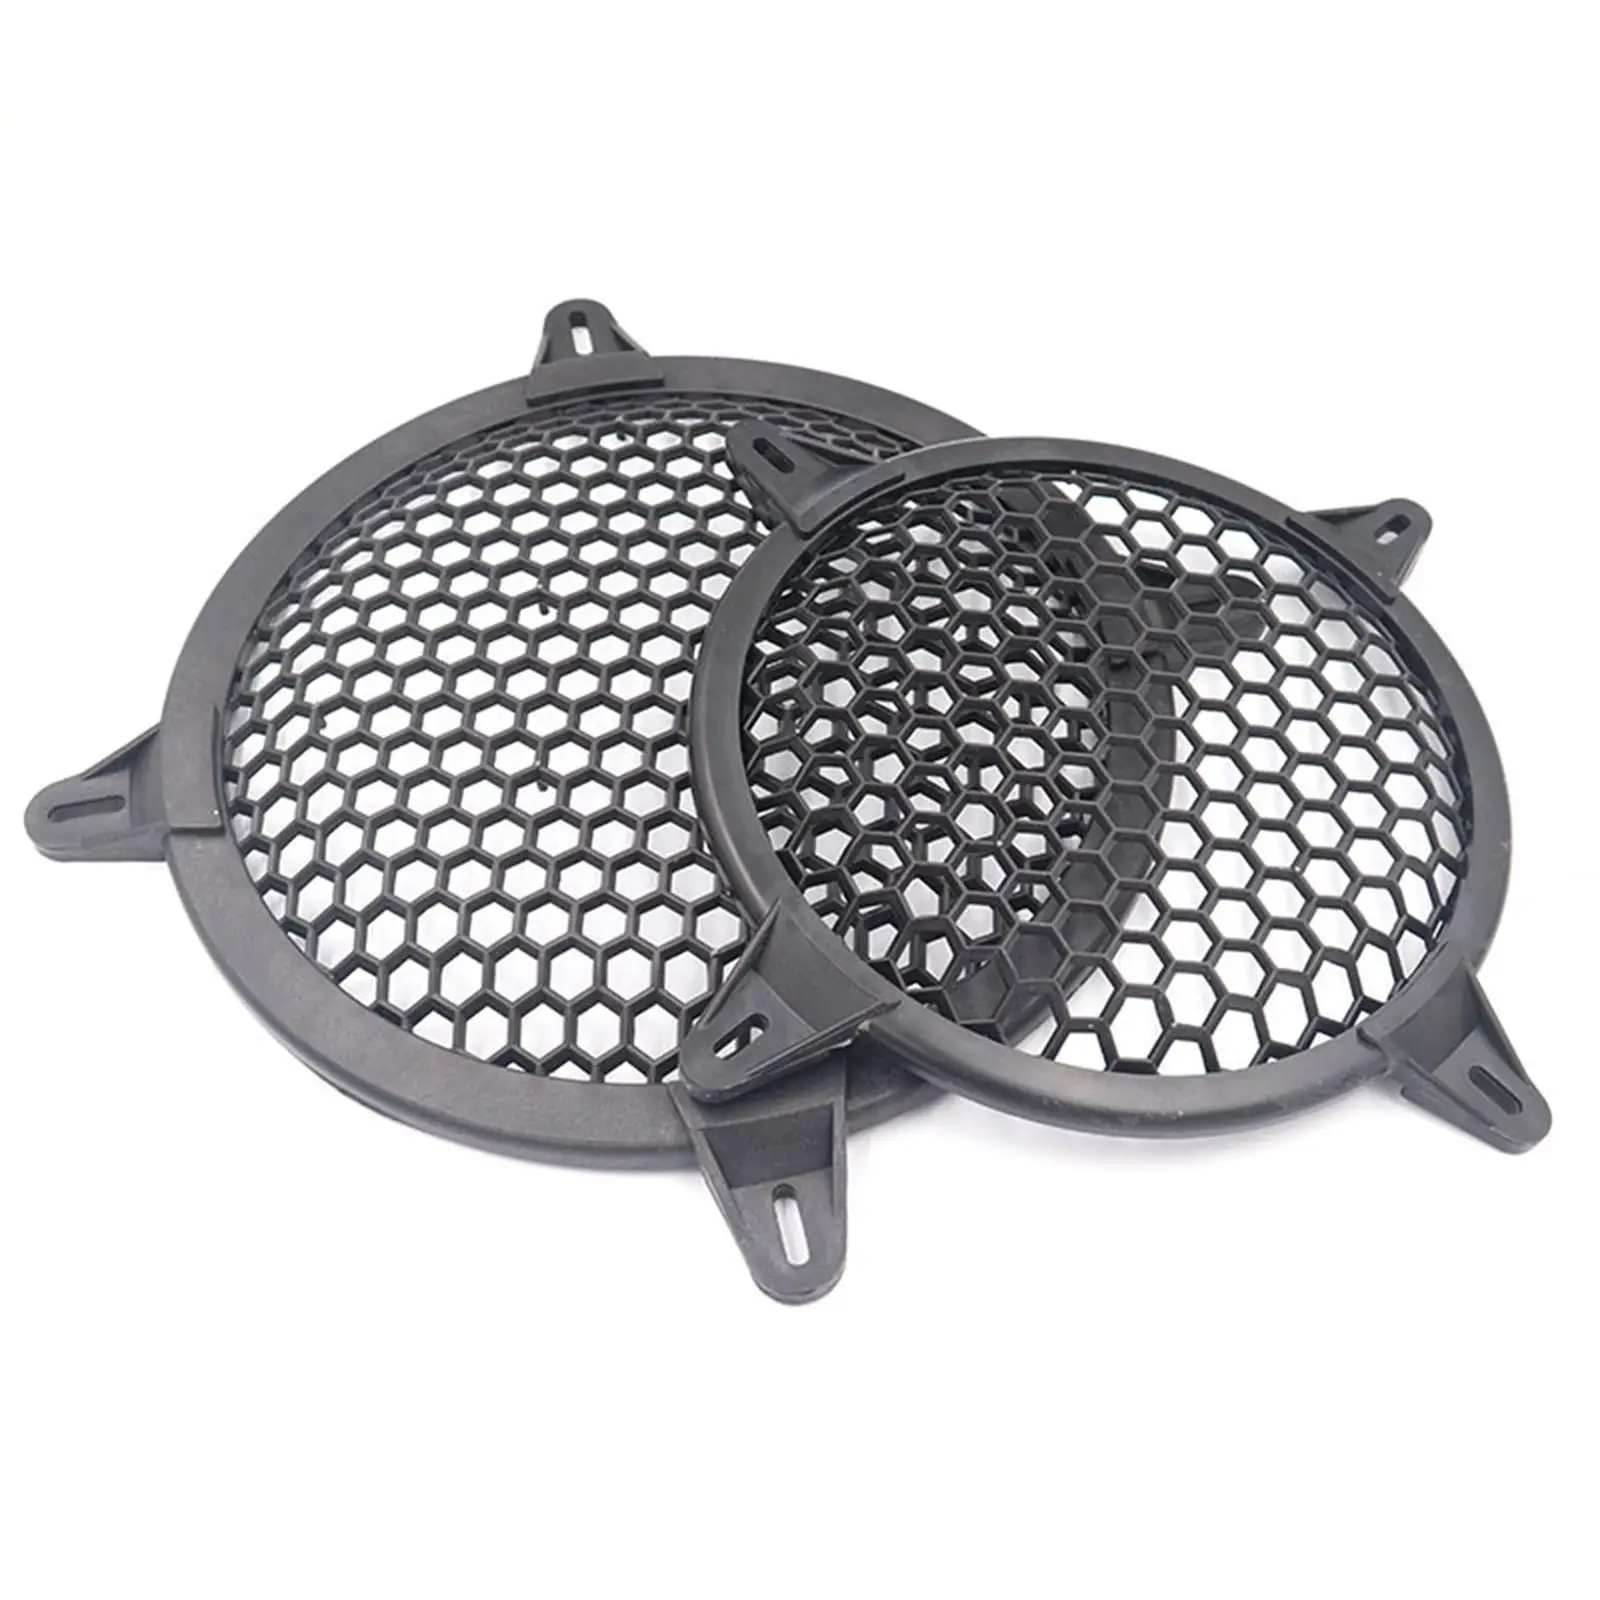 4x 8 Inch Speaker Covers Grills Decorative Circle Guard  Net Cover for Car Speaker Accessories Waffle Speaker Covers